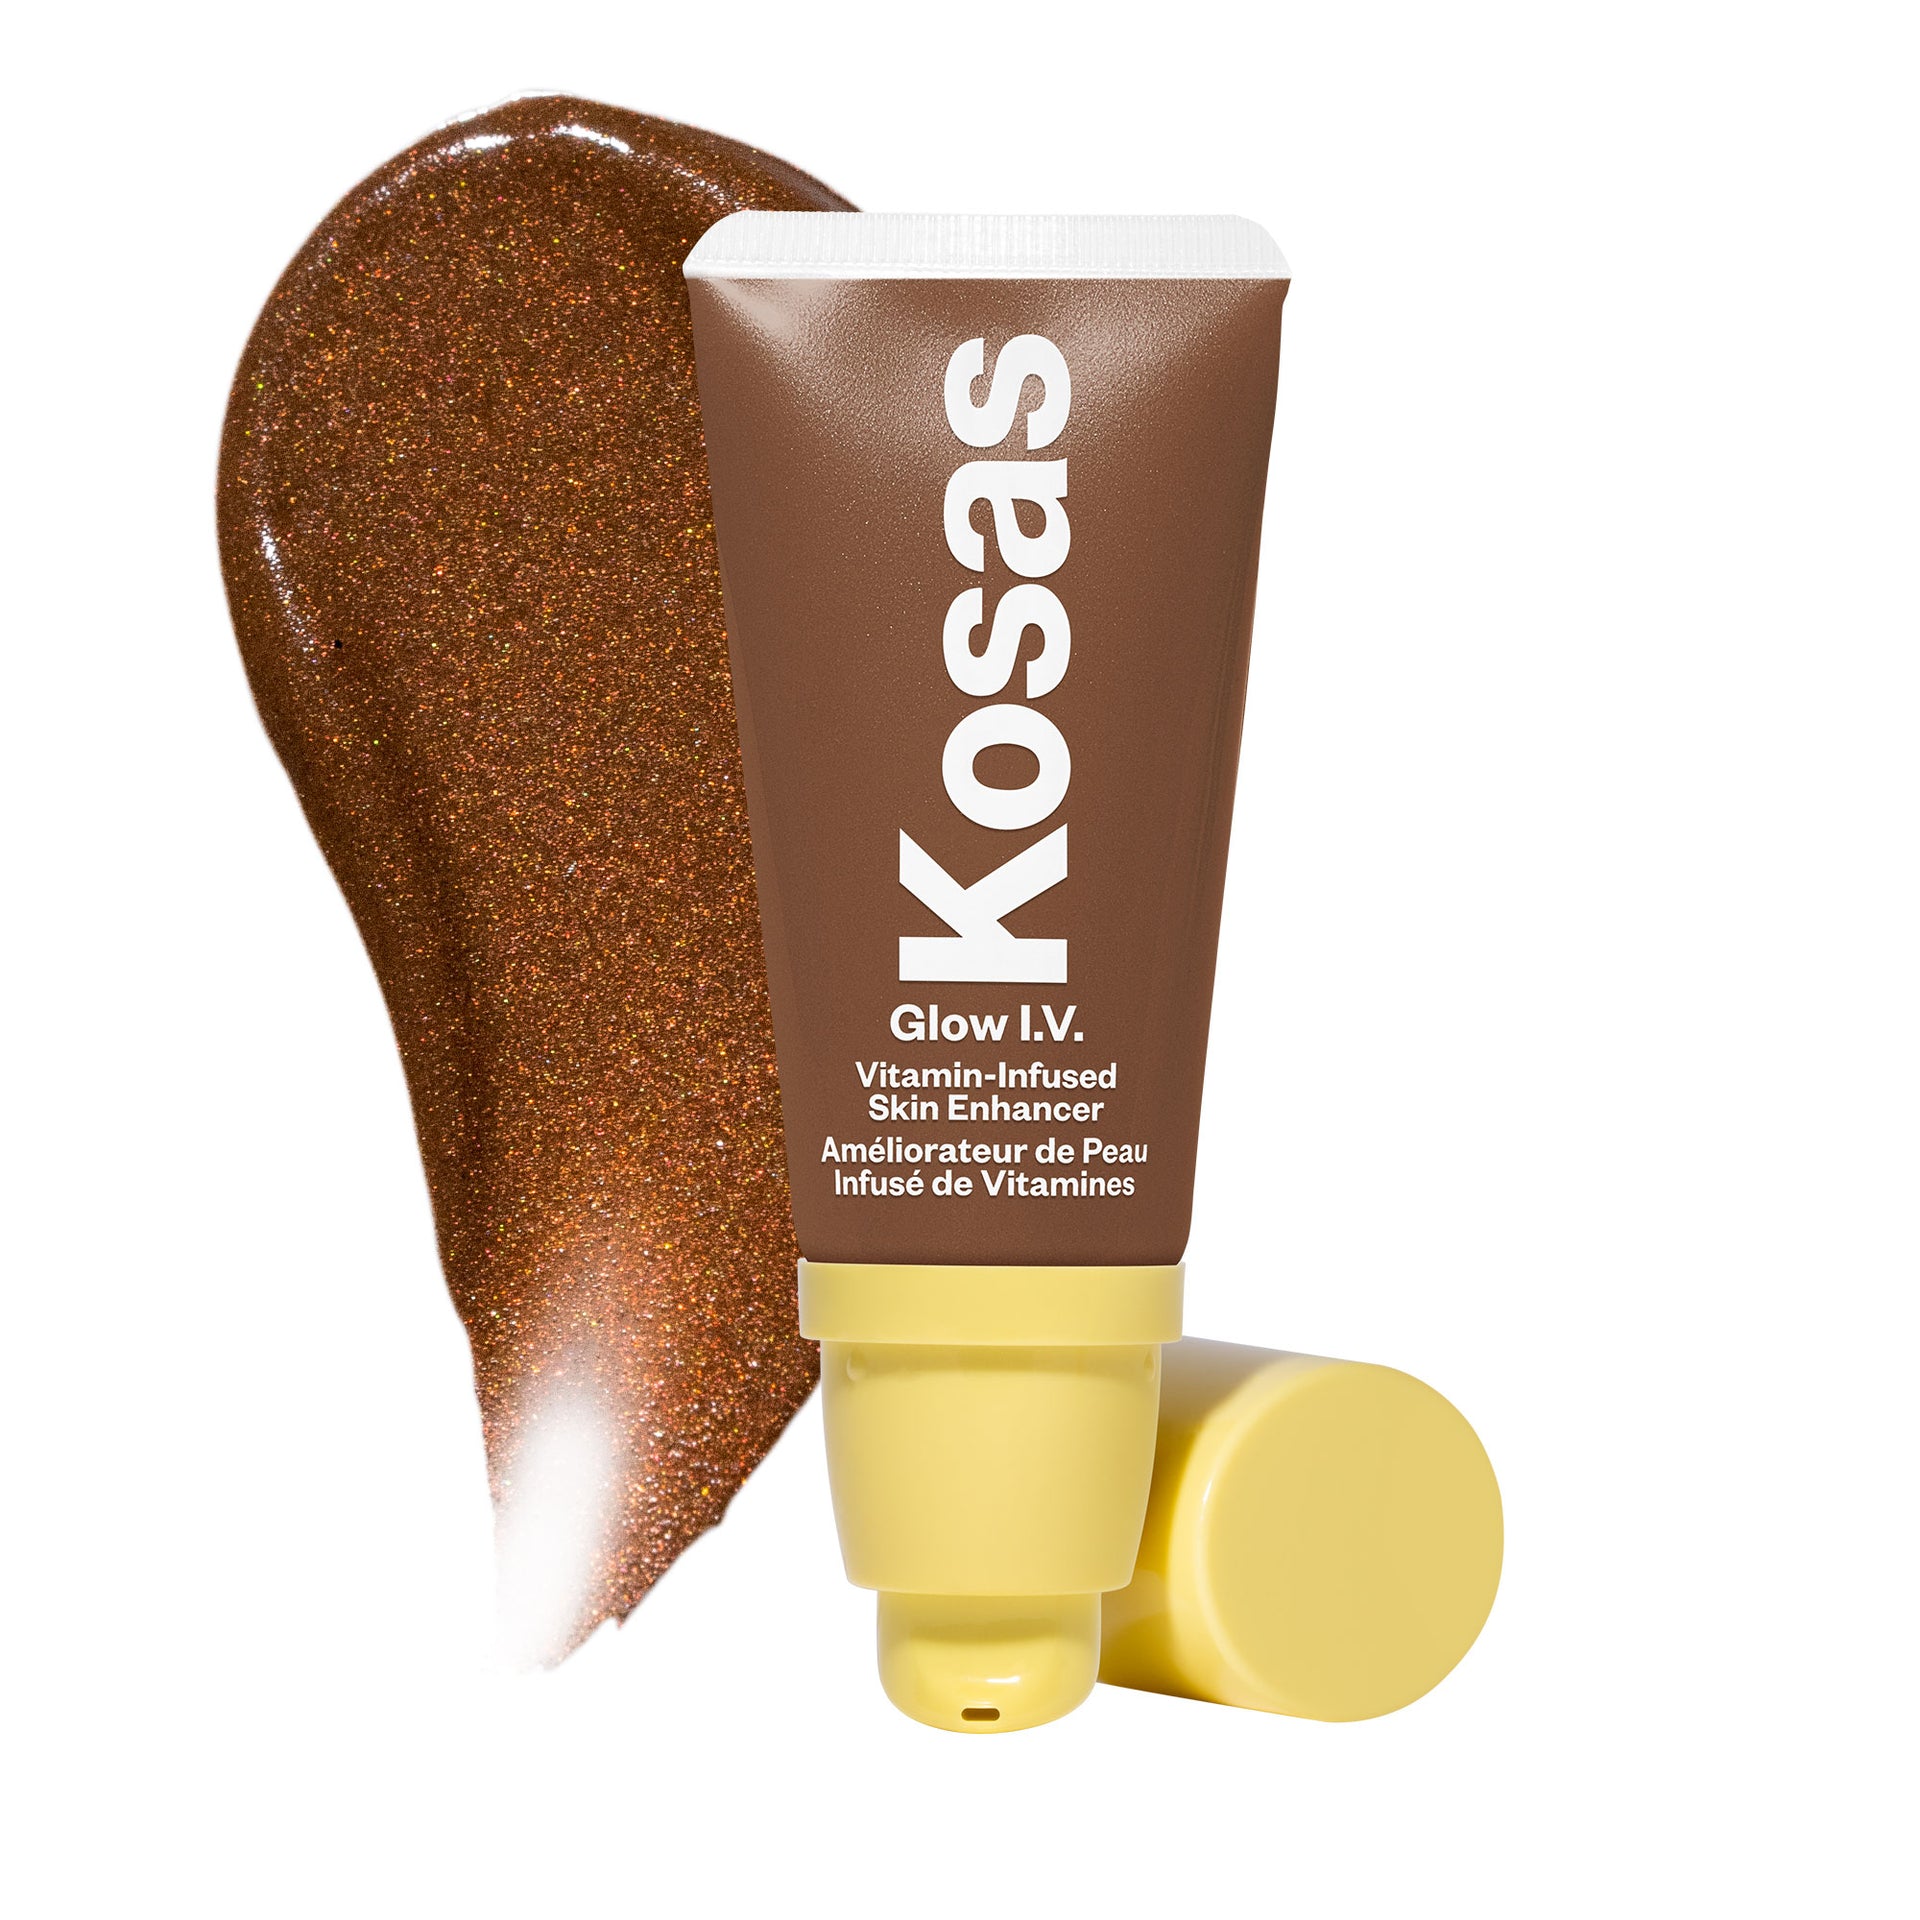 An image of the Kosas Glow IV in the shade Revitalize